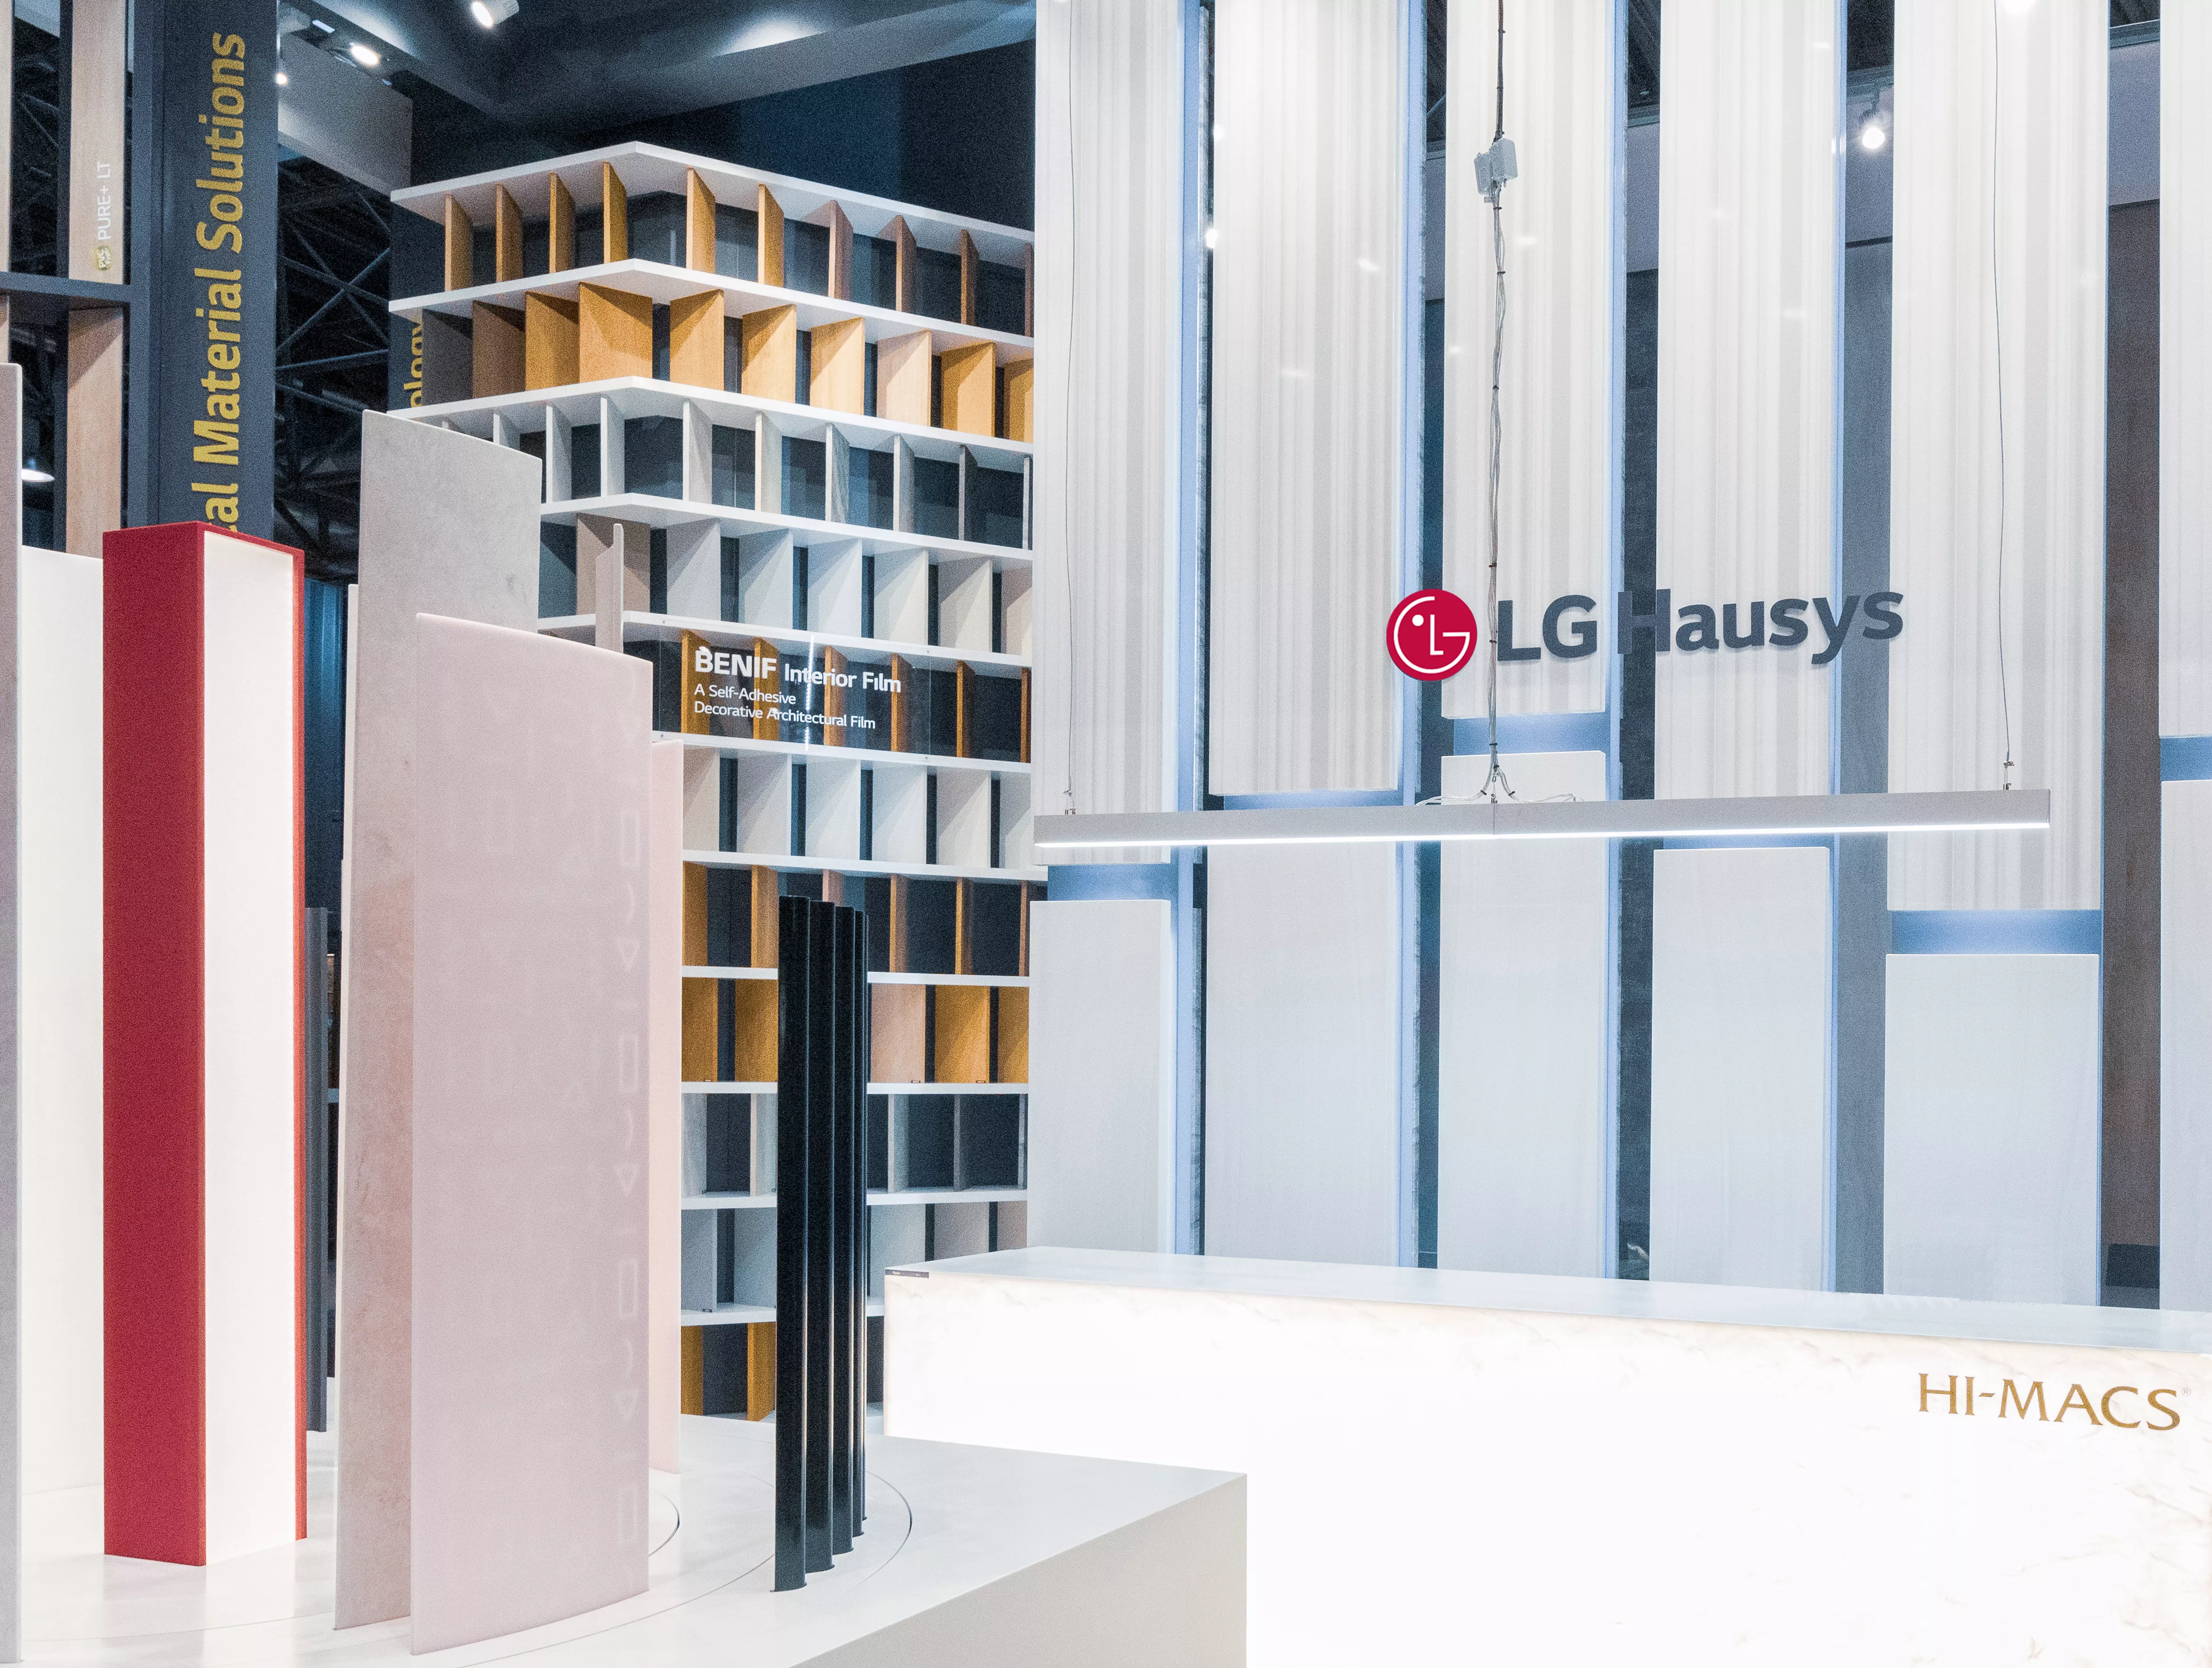 LX Hausys at EuroShop 2020: All the latest HIMACS innovations in one place